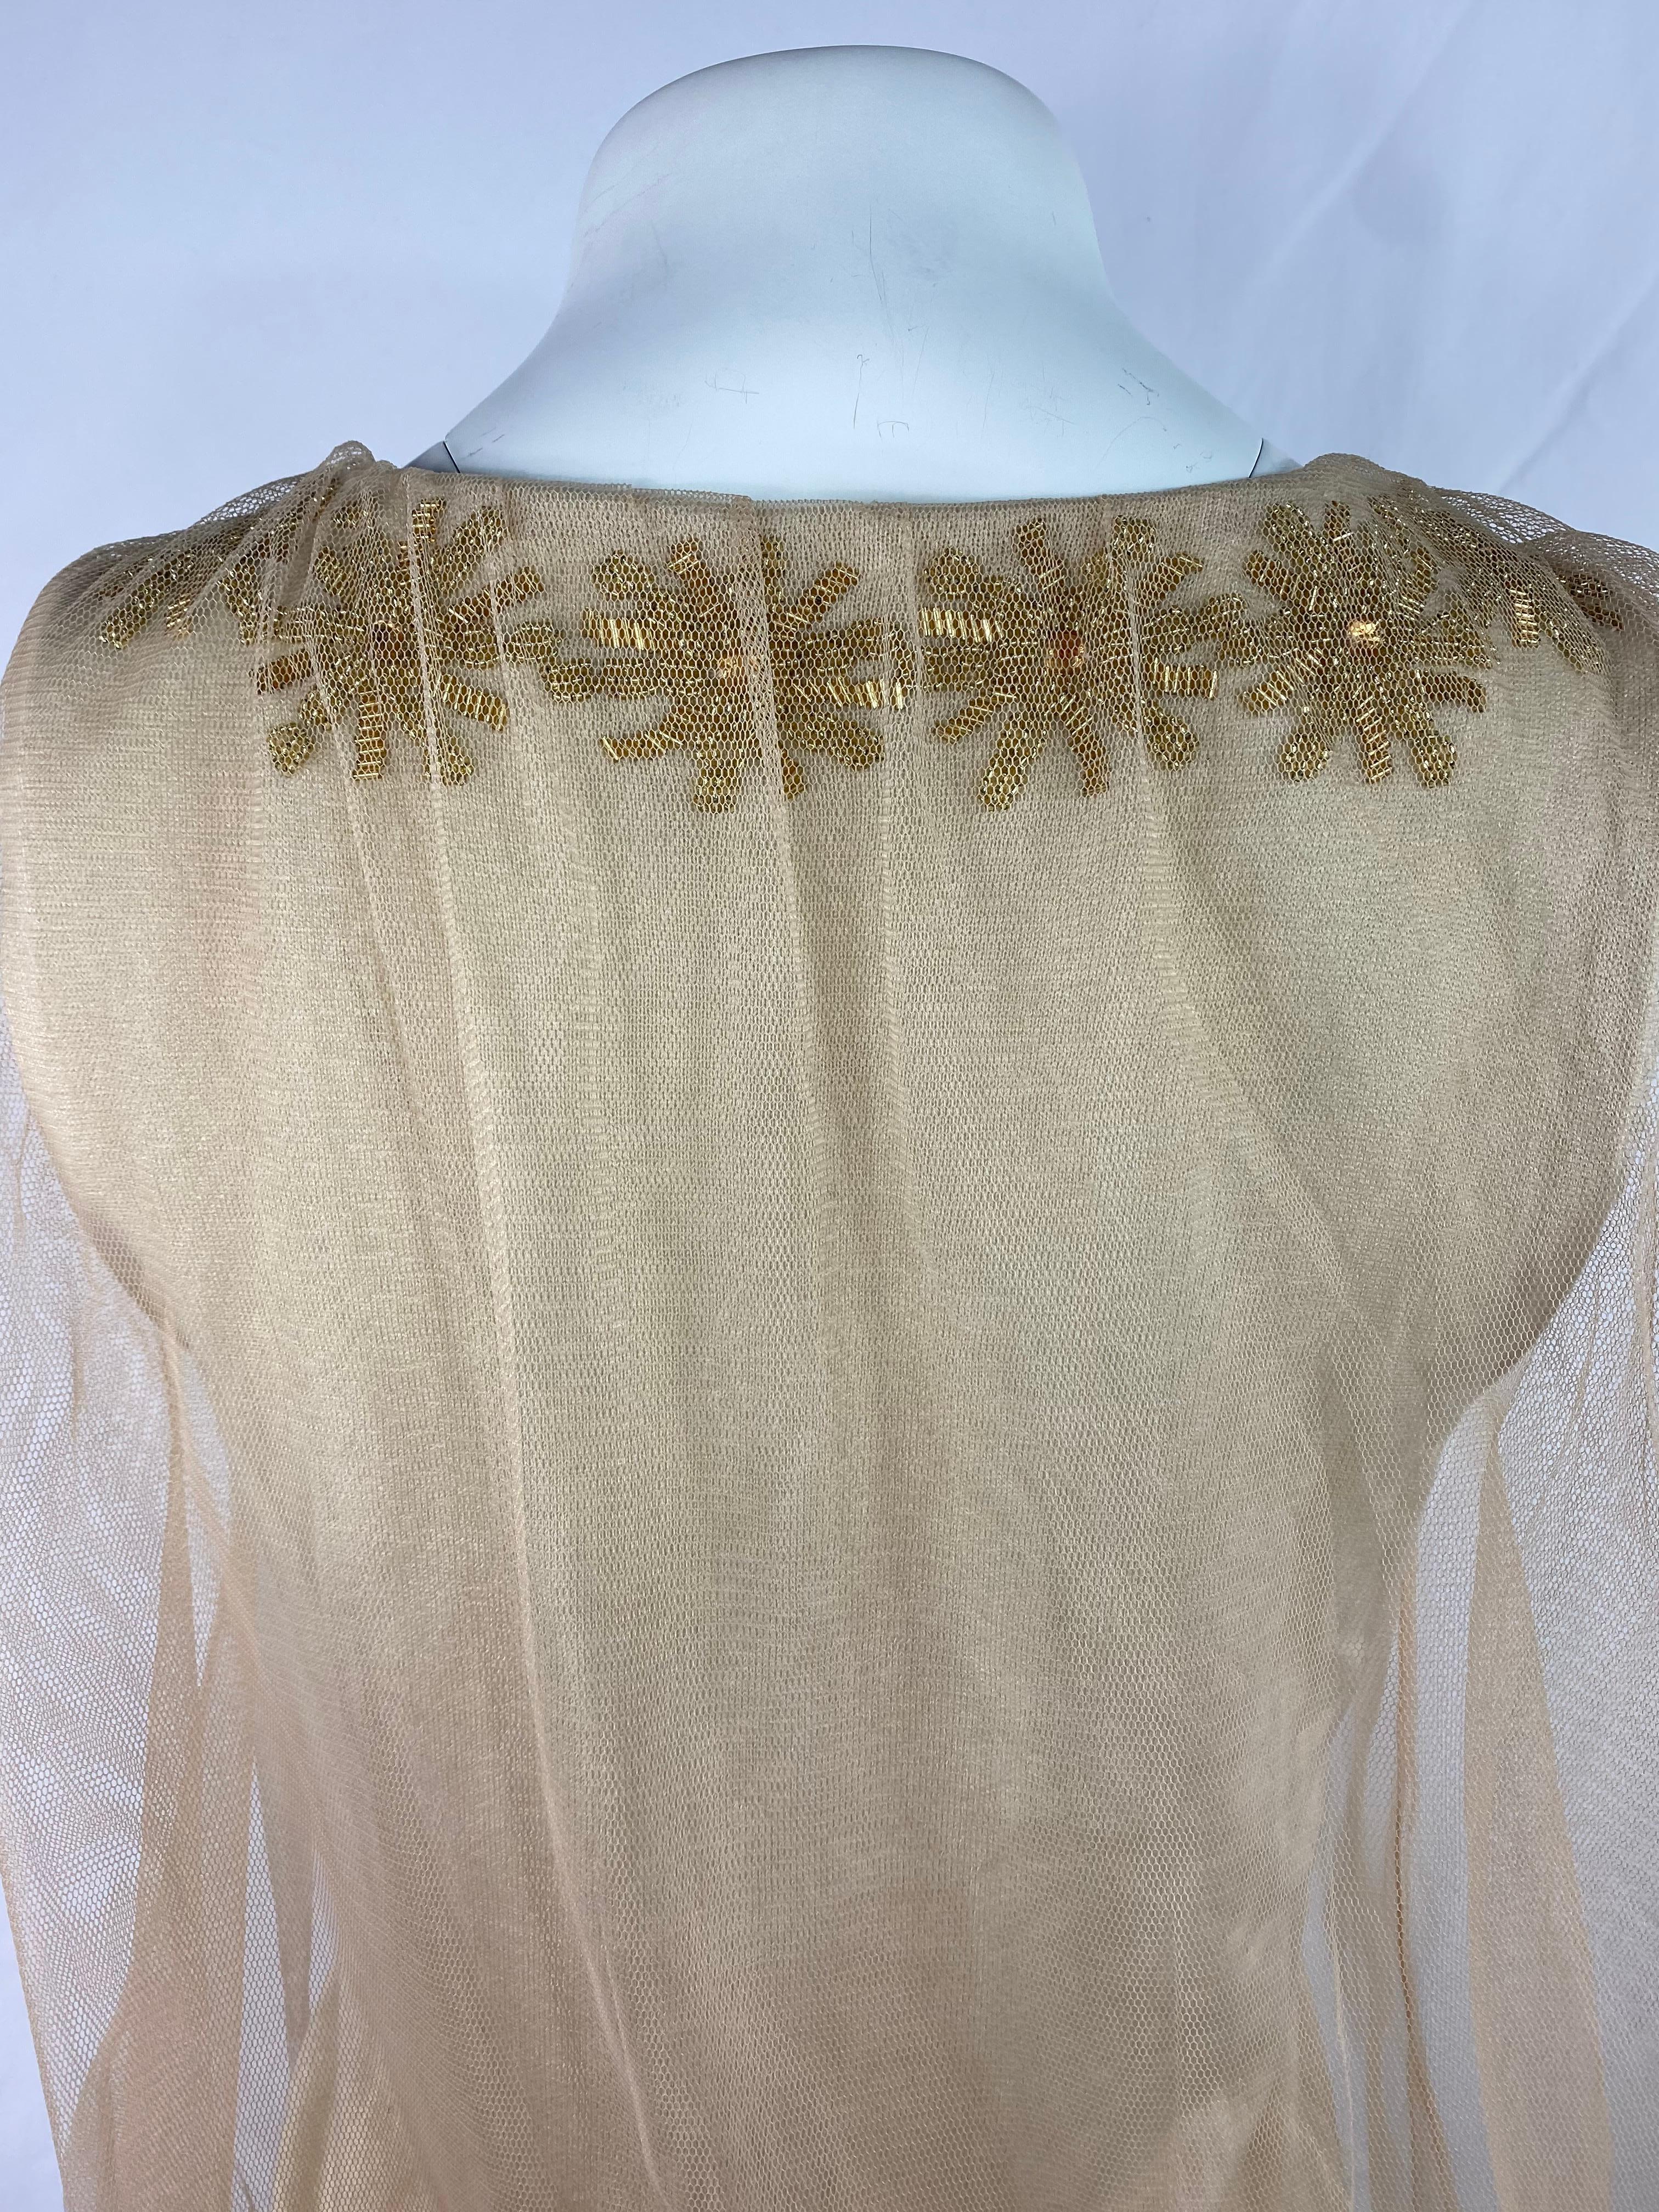 3.1 Phillip Lim Beige Knit and Tulle Vest Blouse Top, Size Small For Sale 2